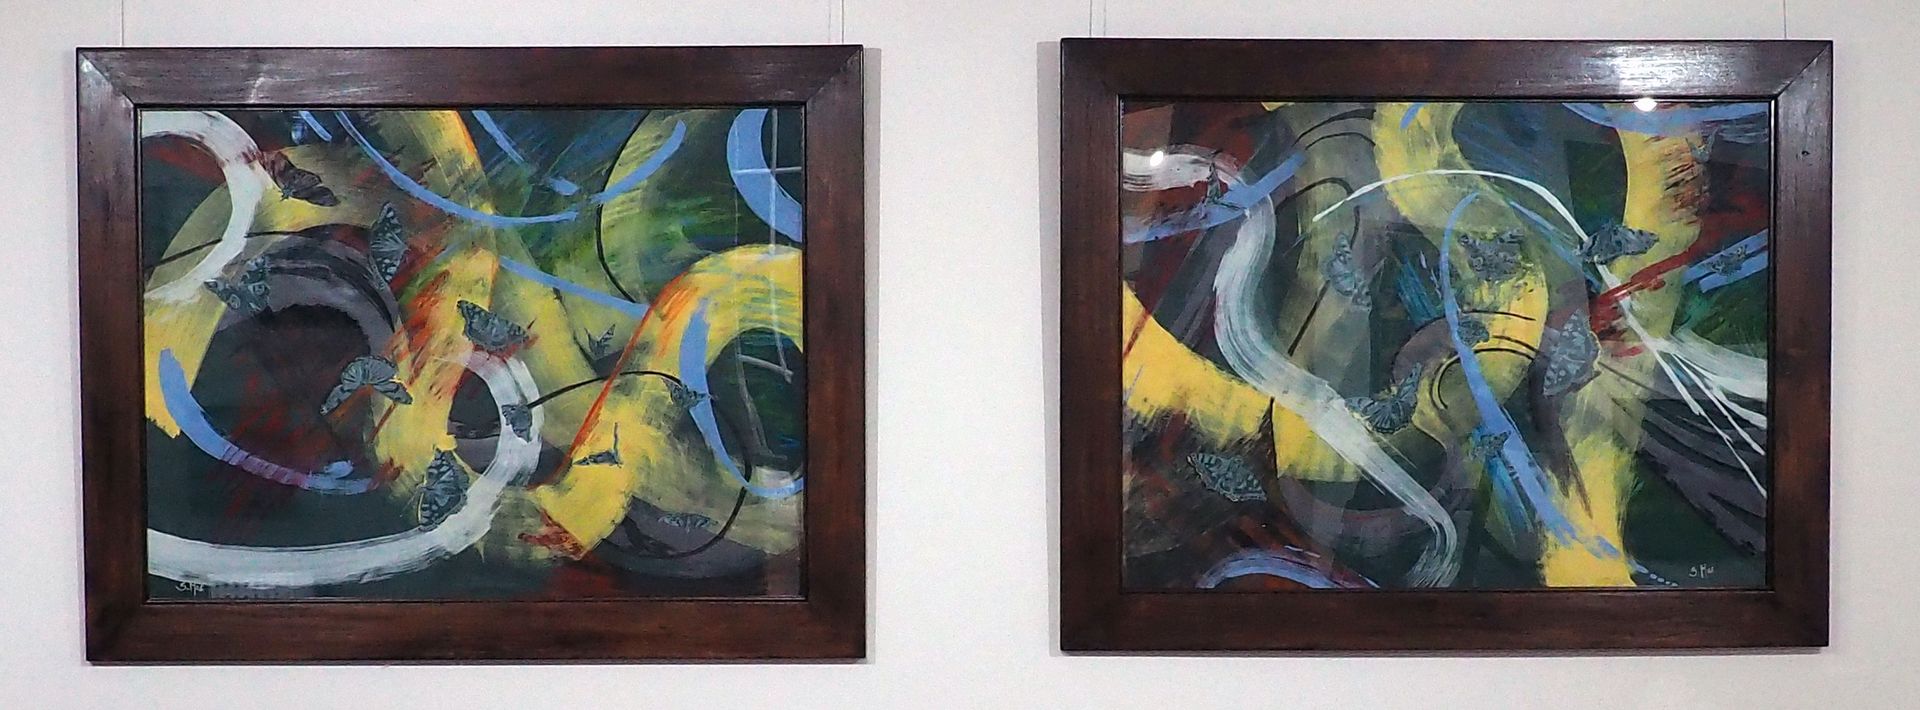 A photo of two large landscape dark wood frames. The framed images are behind perspex and there is a slight reflection. The images consist of large yellow, white and blue brush trails that flow from one frame to the other. The pieces belong together as a pair as they are 'joined' by the largest yellow brush trail . The background is dark green and there are around 14 delicate grey butterflies that move amongst the brush marks.